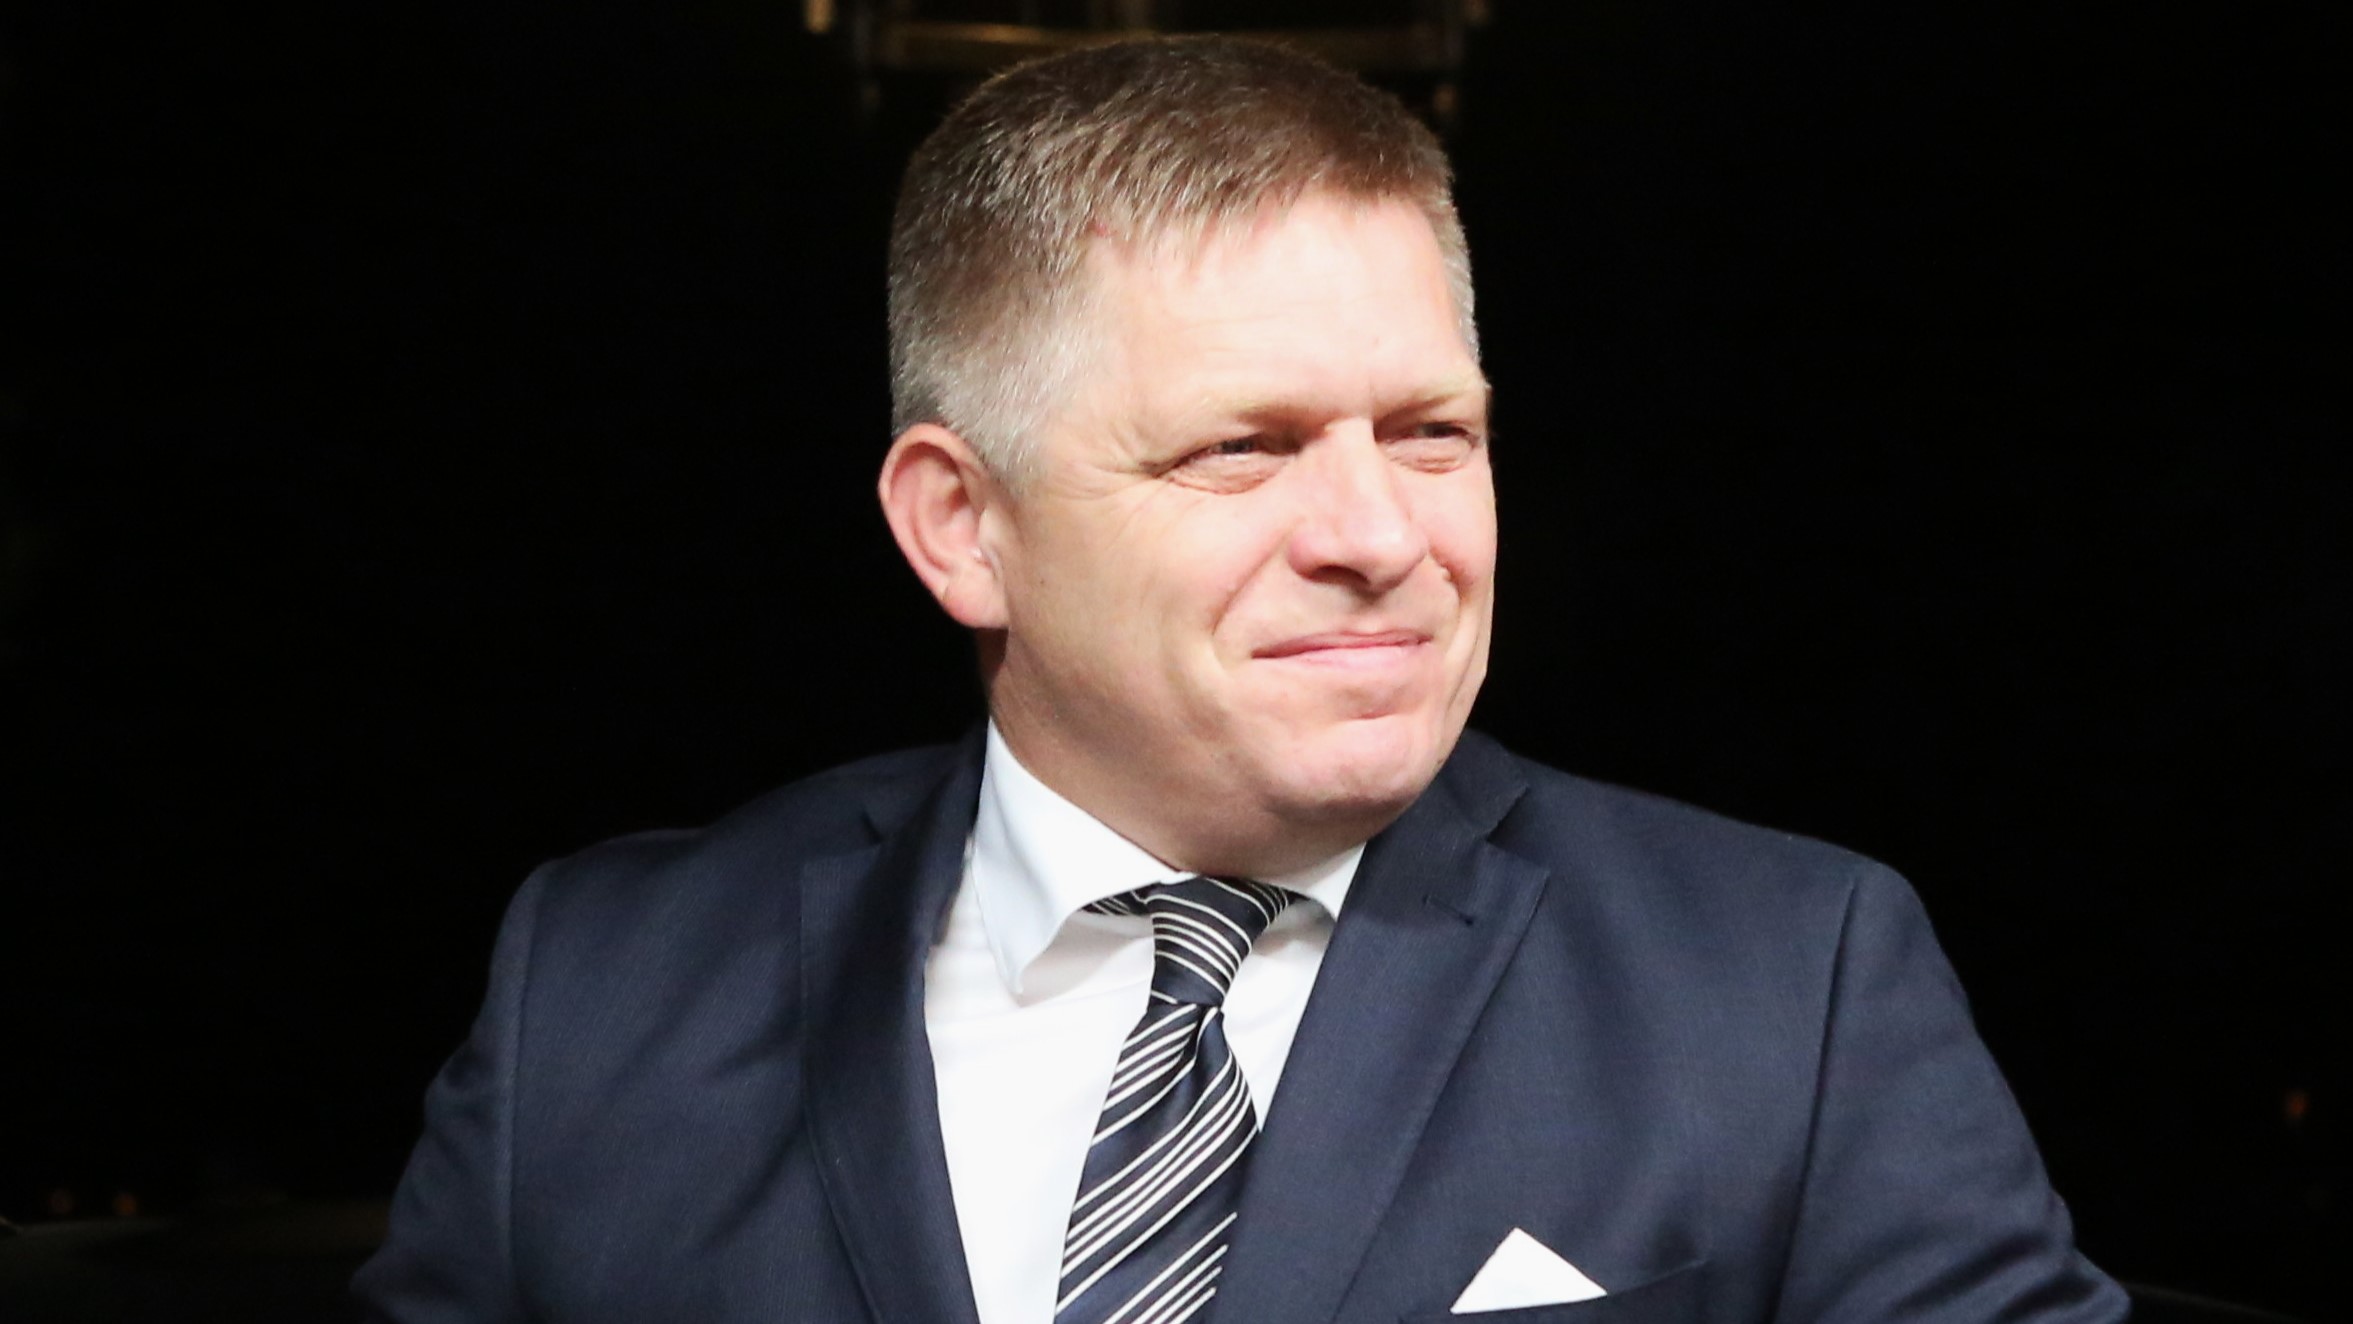 Victory of Robert Fico and his Smer-SD party in the Slovak legislative elections, “concern” within the European Union